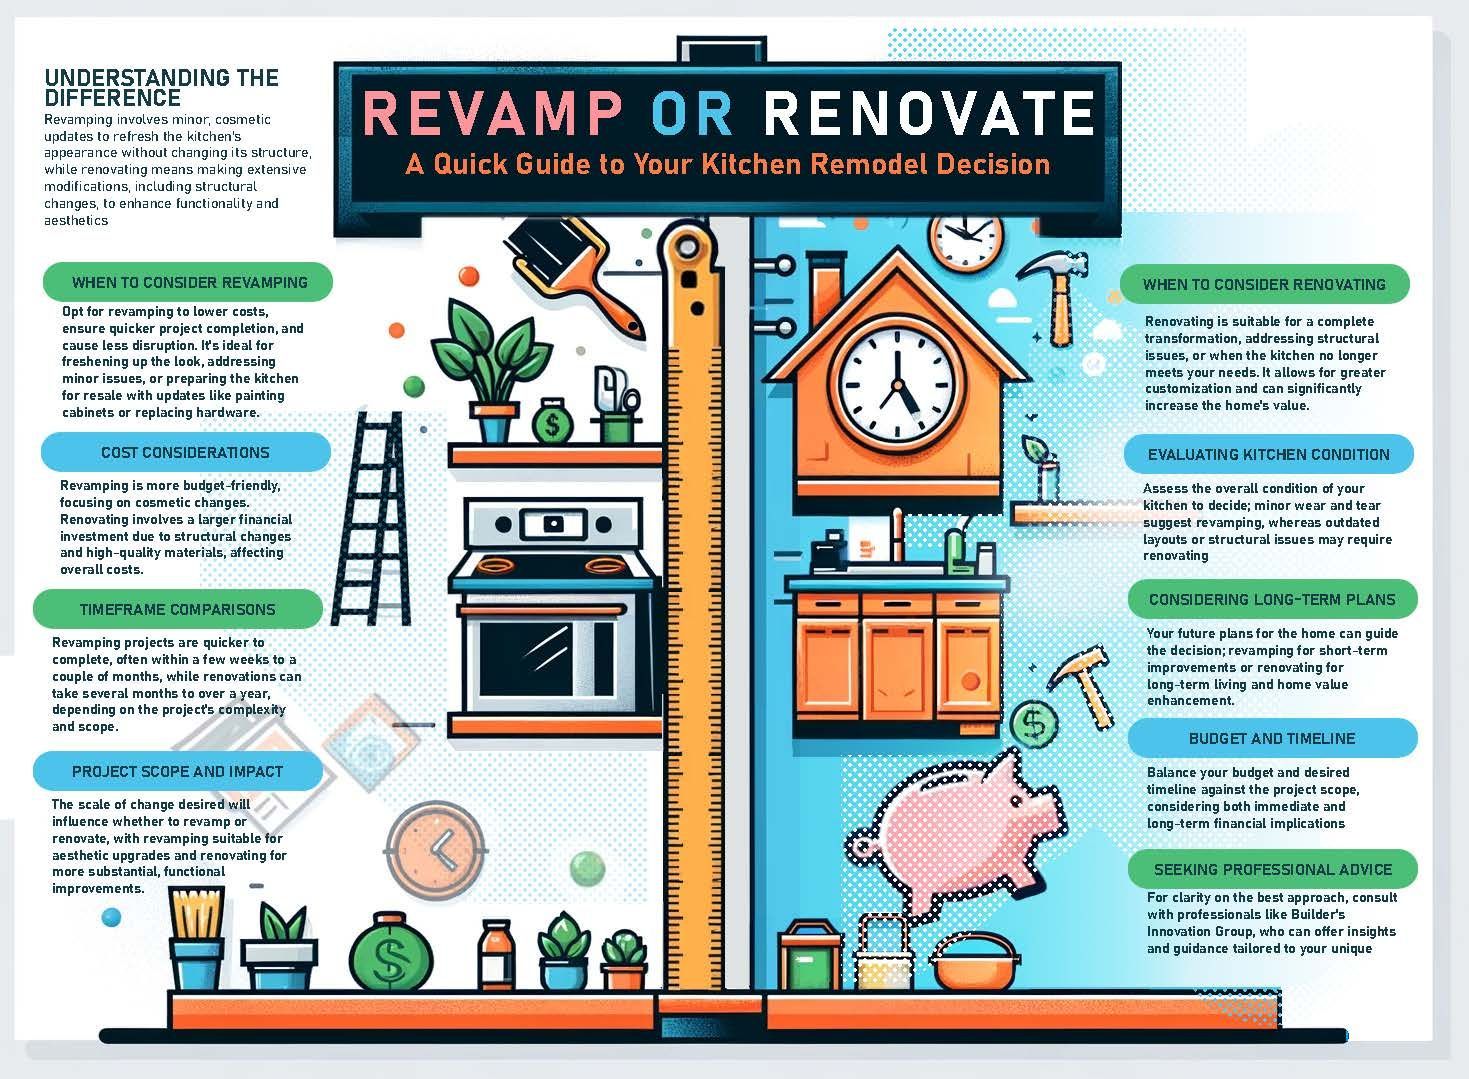 A poster that says revamp or renovate on it.